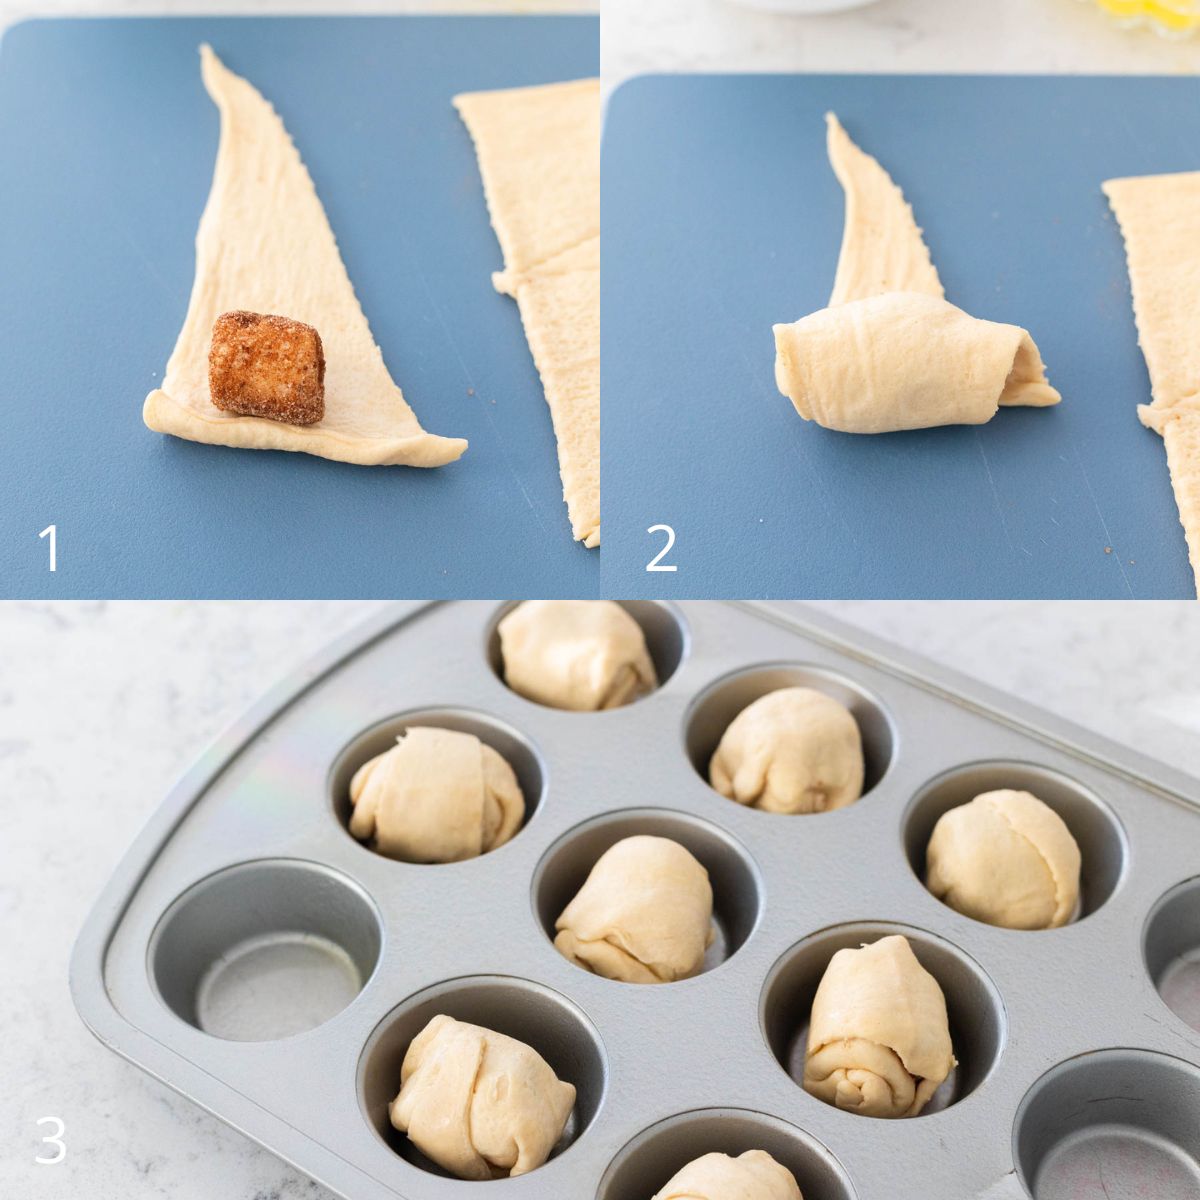 The crescent roll dough is wrapped around the cinnamon sugar marshmallow.